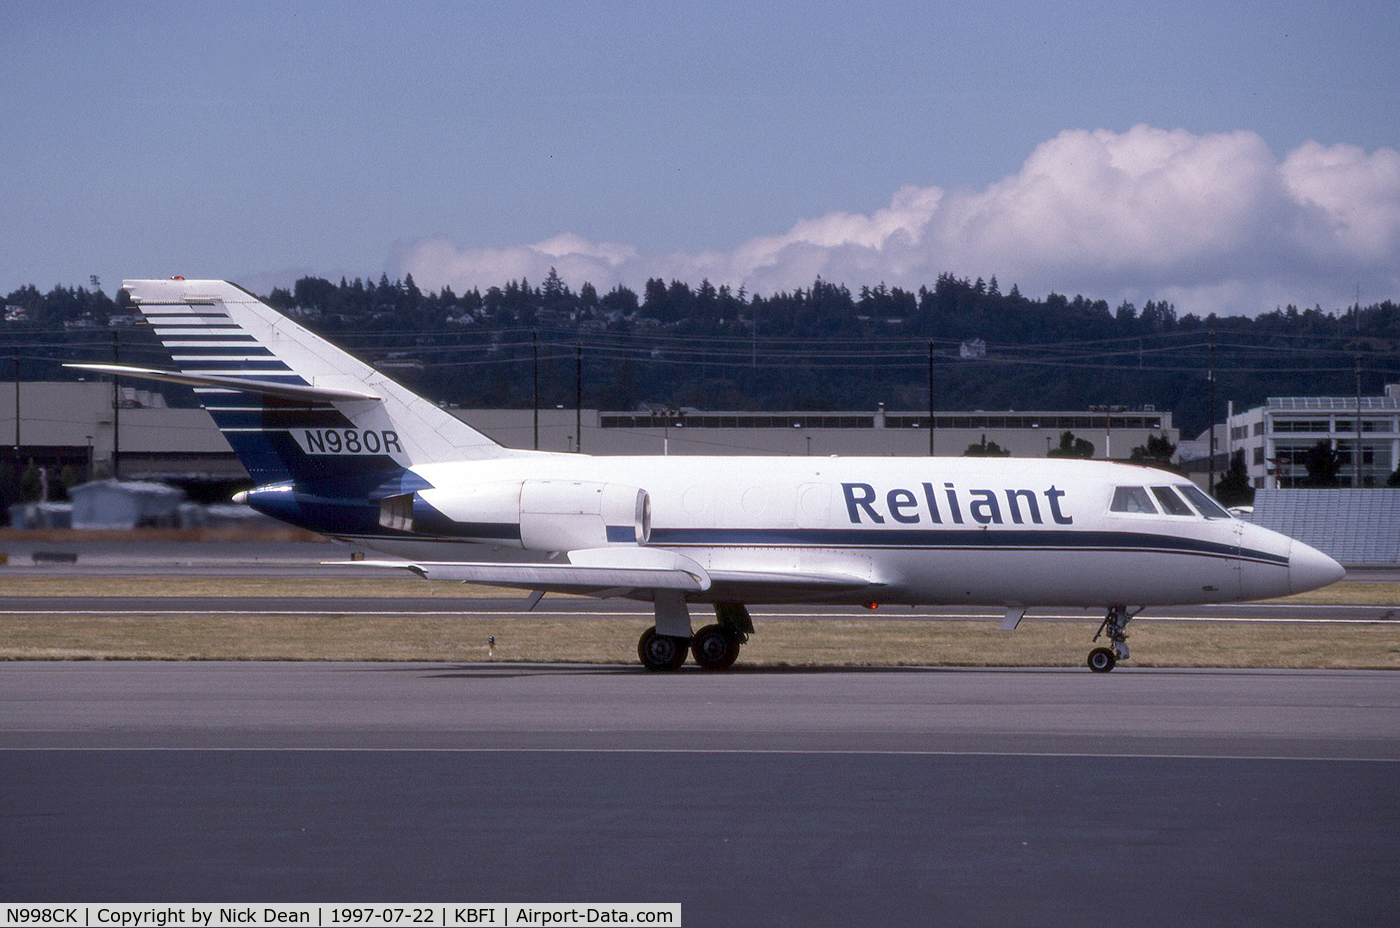 N998CK, 1967 Dassault Falcon 20 C/N 98, KBFI (Seen here as N980R and currently registered N998CK as posted)